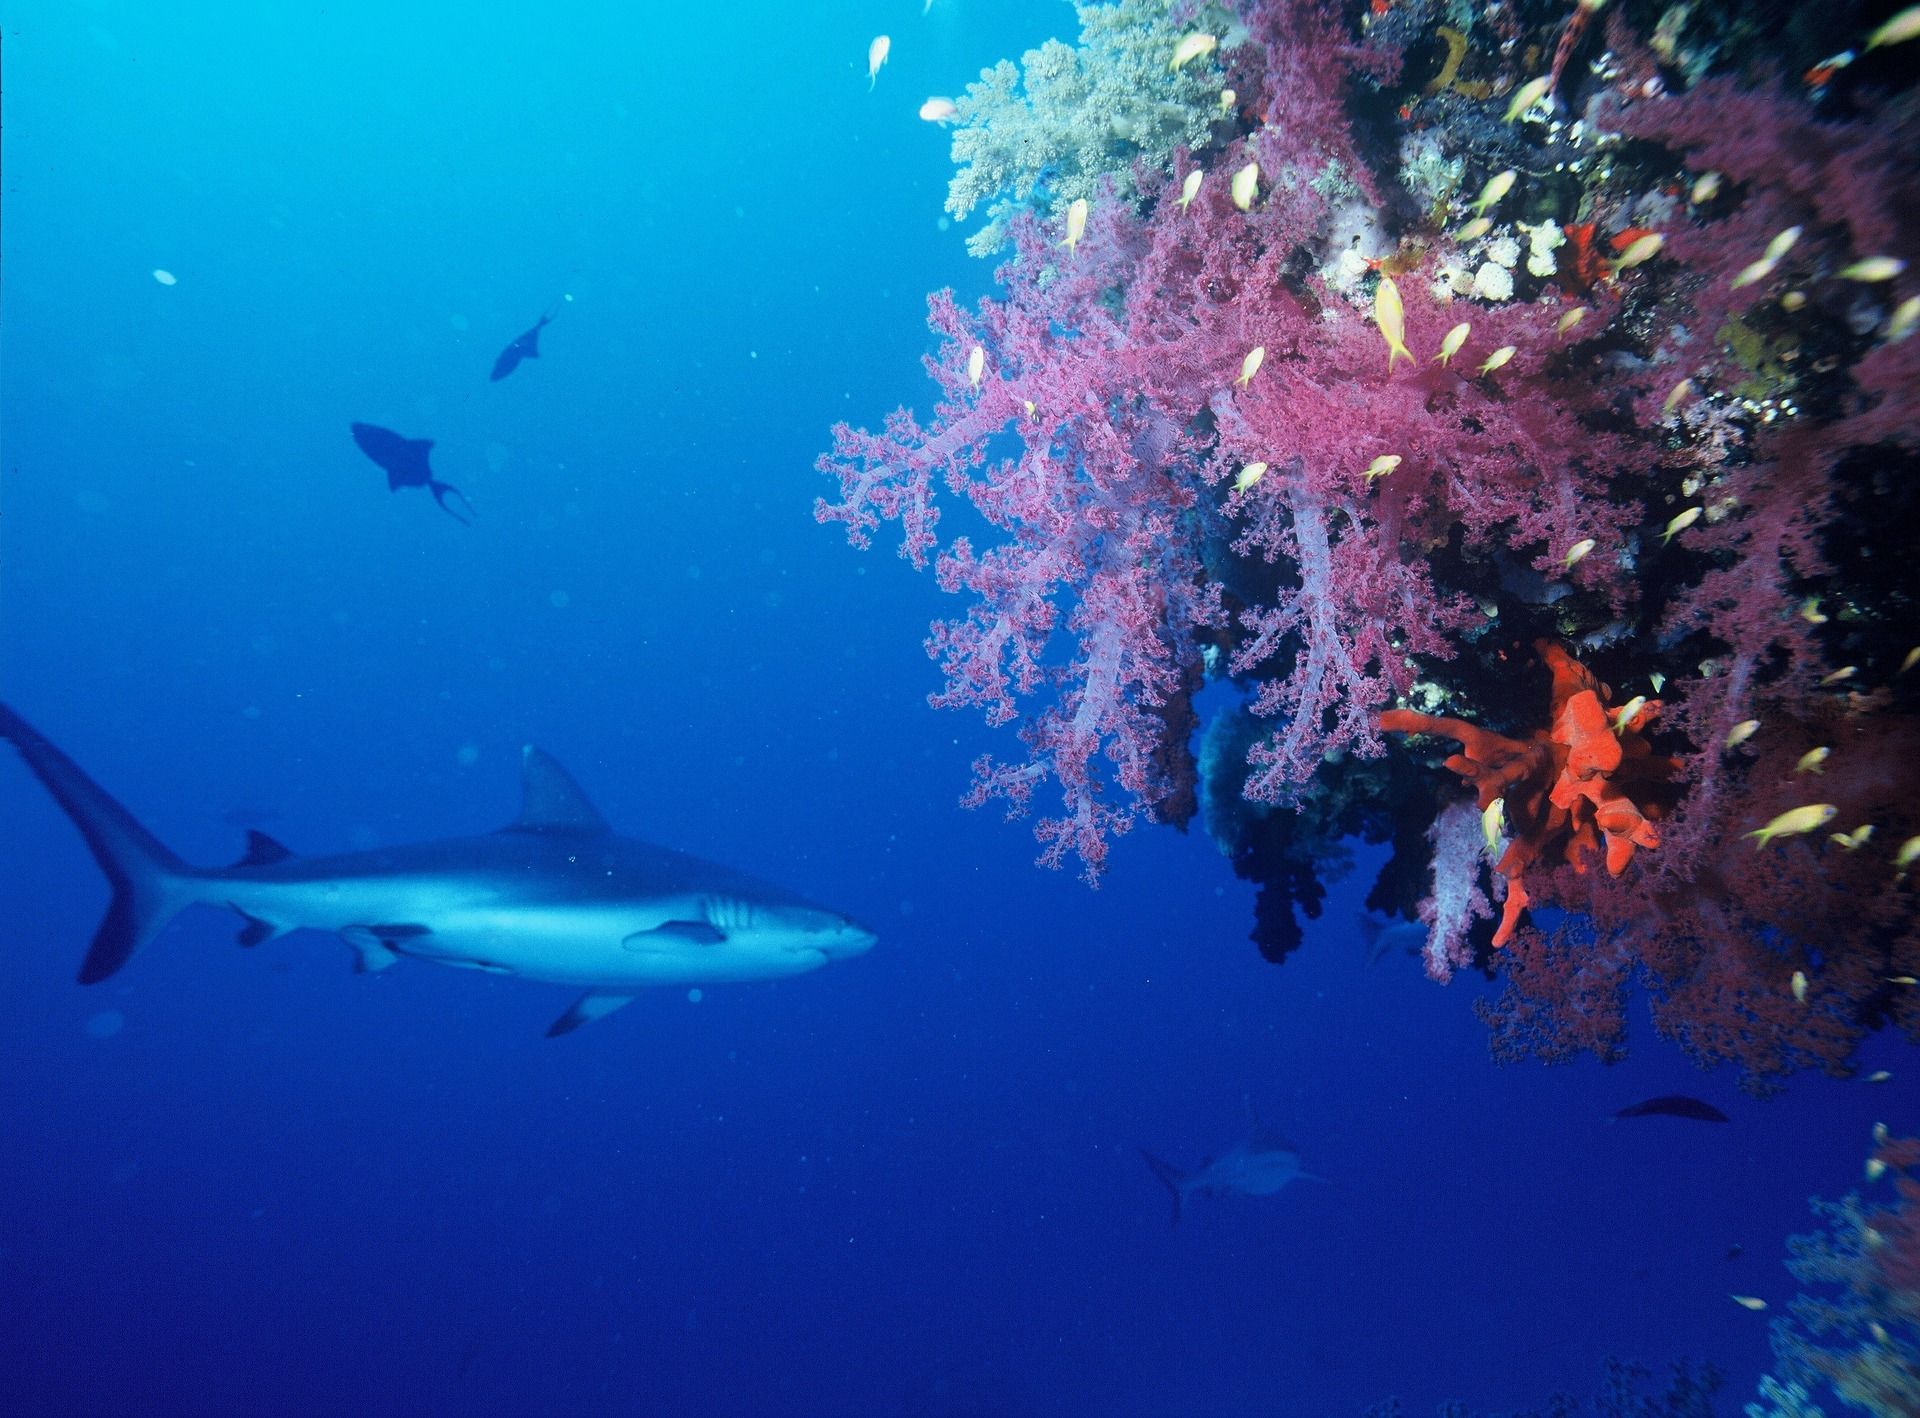 If you are interested in sharks, don't miss the gray reef sharks in Thailand. Photo: Pixabay